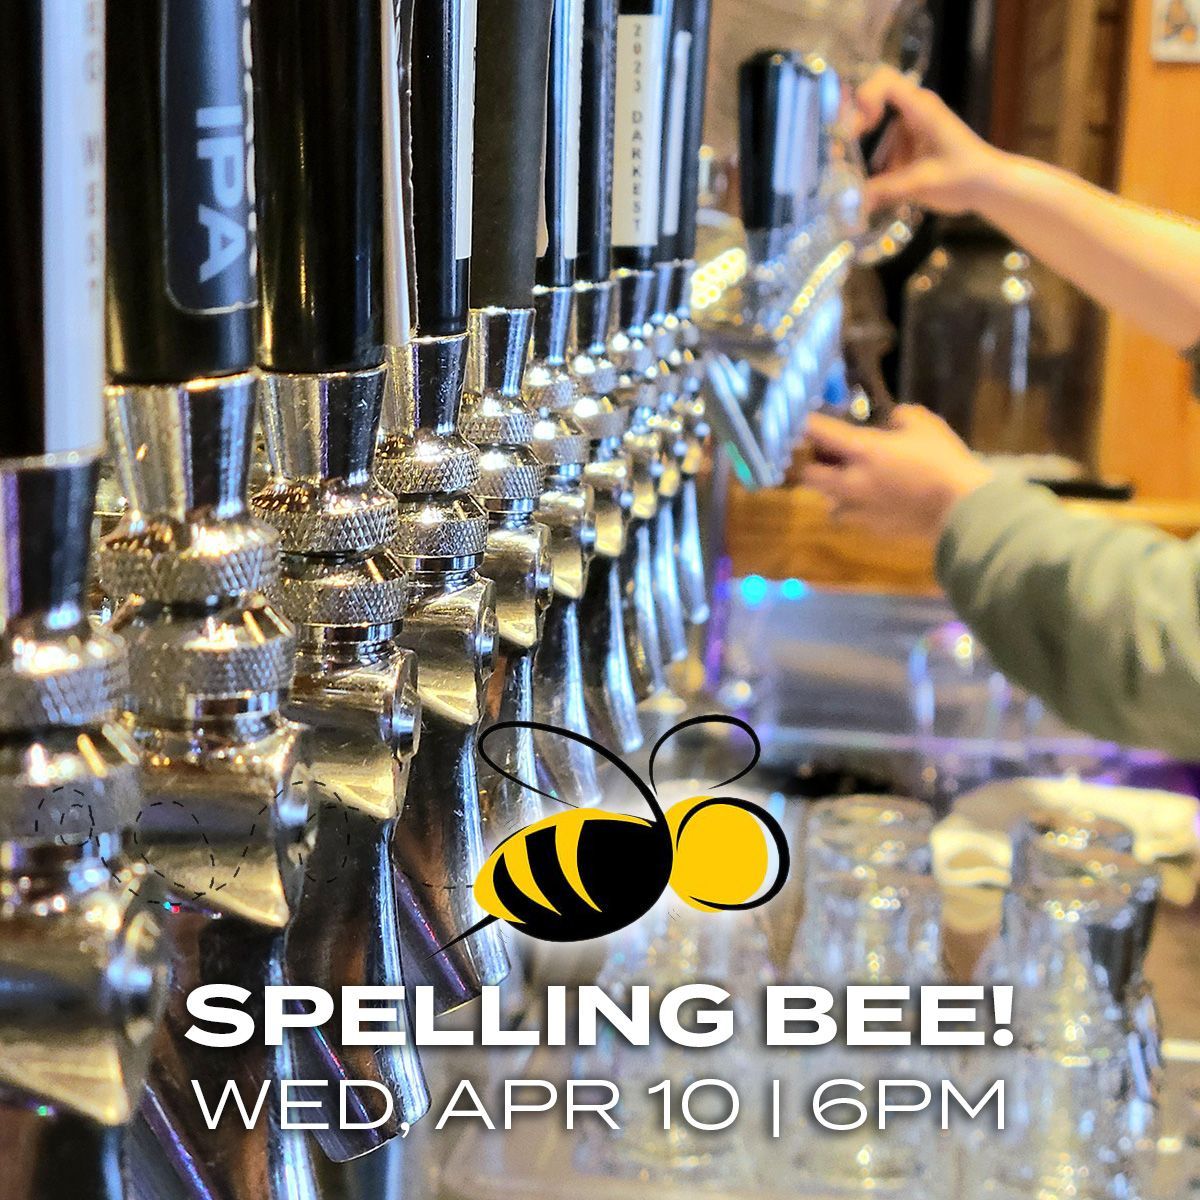 Let's sip some beers and try to spell words aloud! Join us tomorrow, April 10 at 6pm for our 2nd ever adult spelling bee. It's fun, challenging, entertaining, and top three will win gift cards! Be sure to sign up before 6pm on Wednesday.